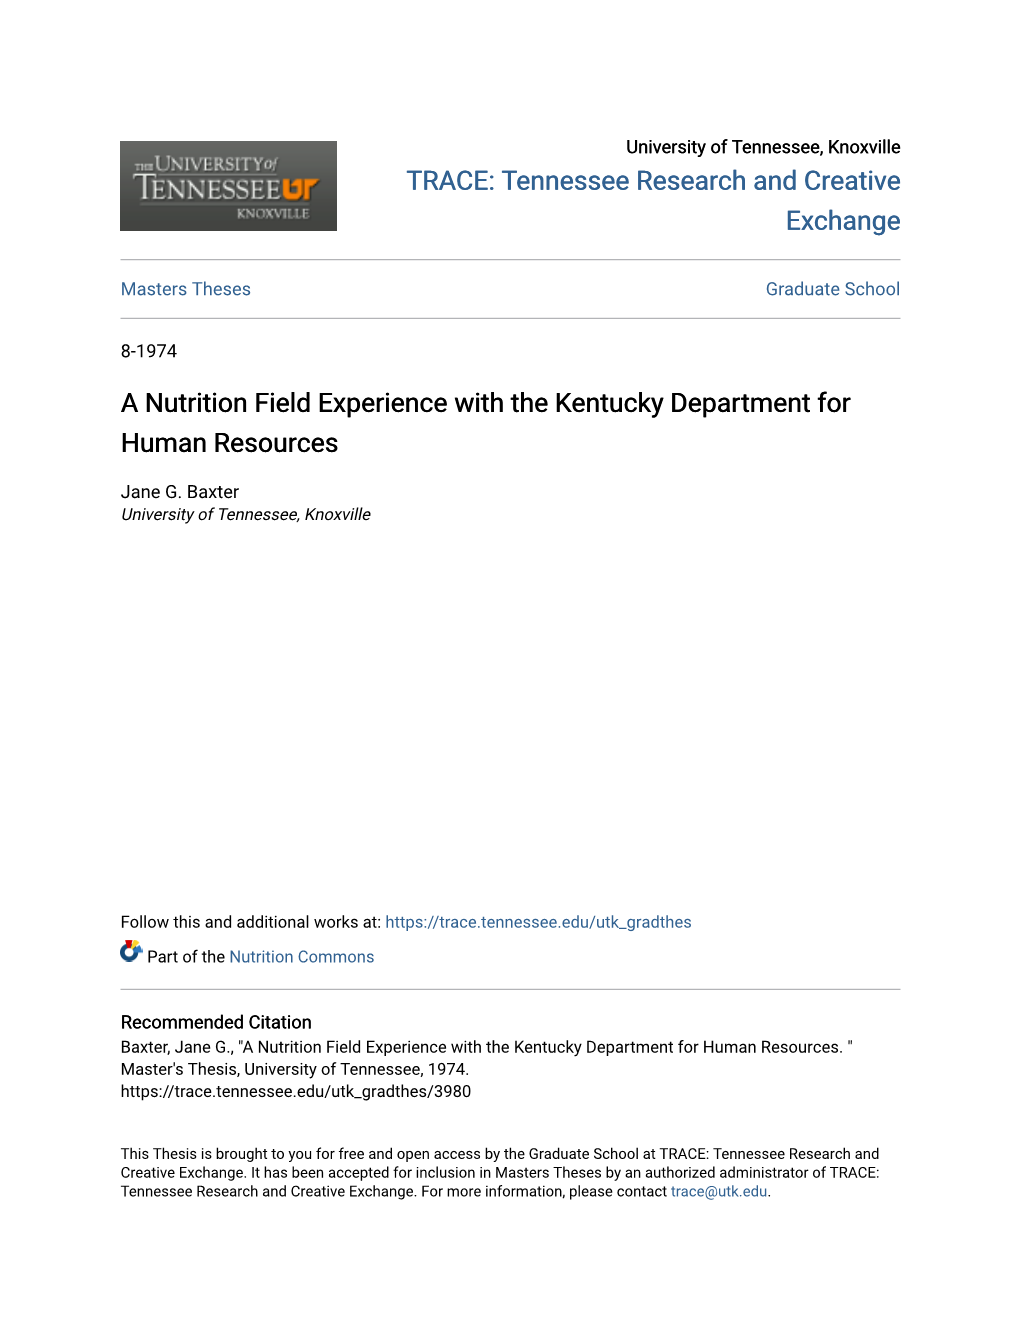 A Nutrition Field Experience with the Kentucky Department for Human Resources